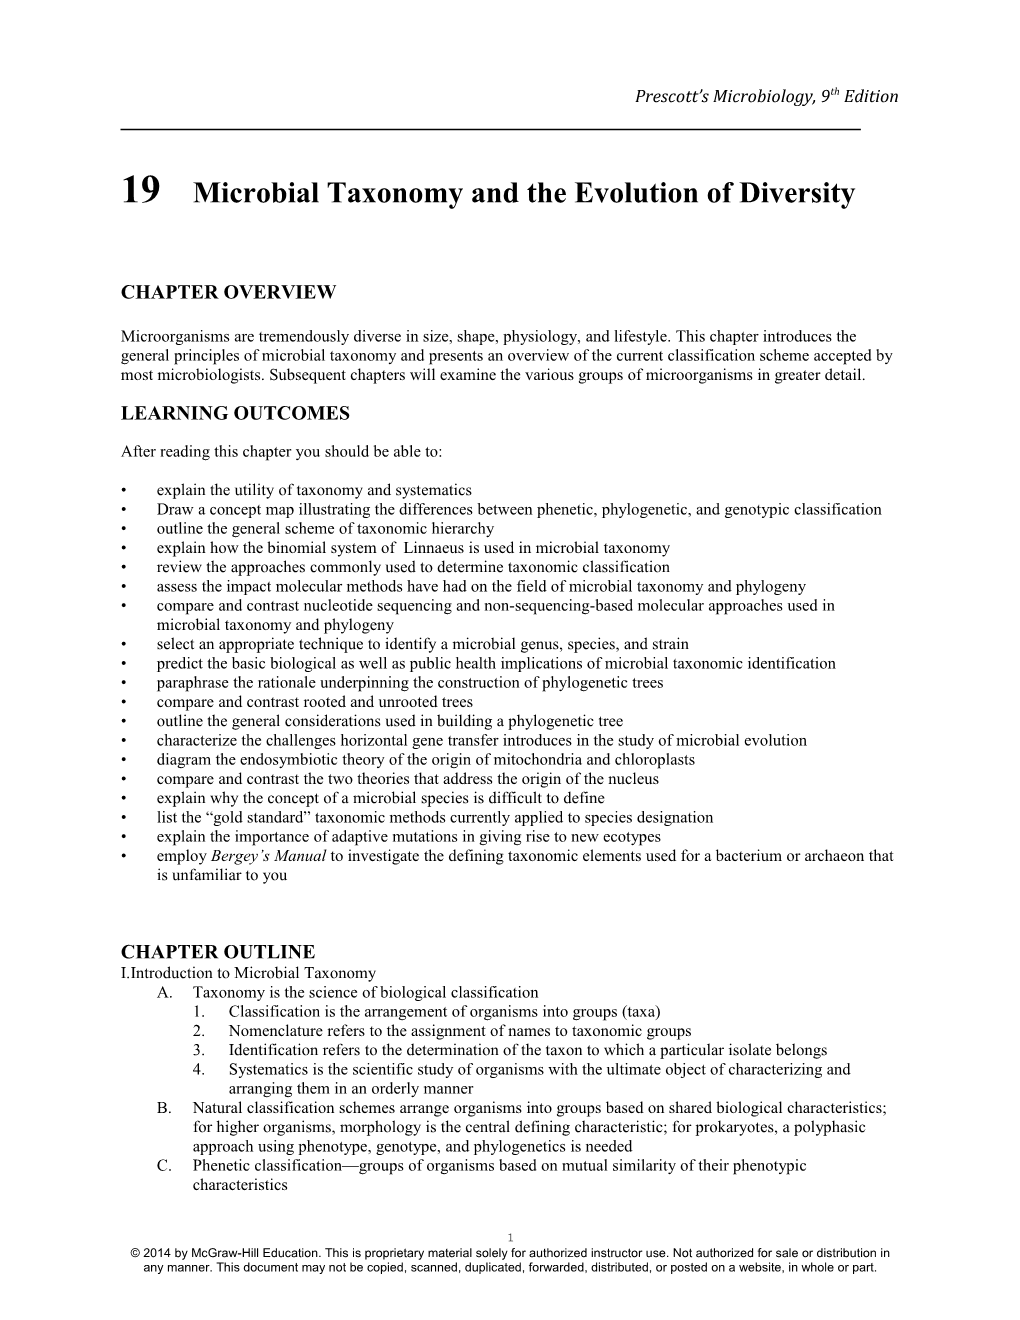 19Microbial Taxonomy and the Evolution of Diversity